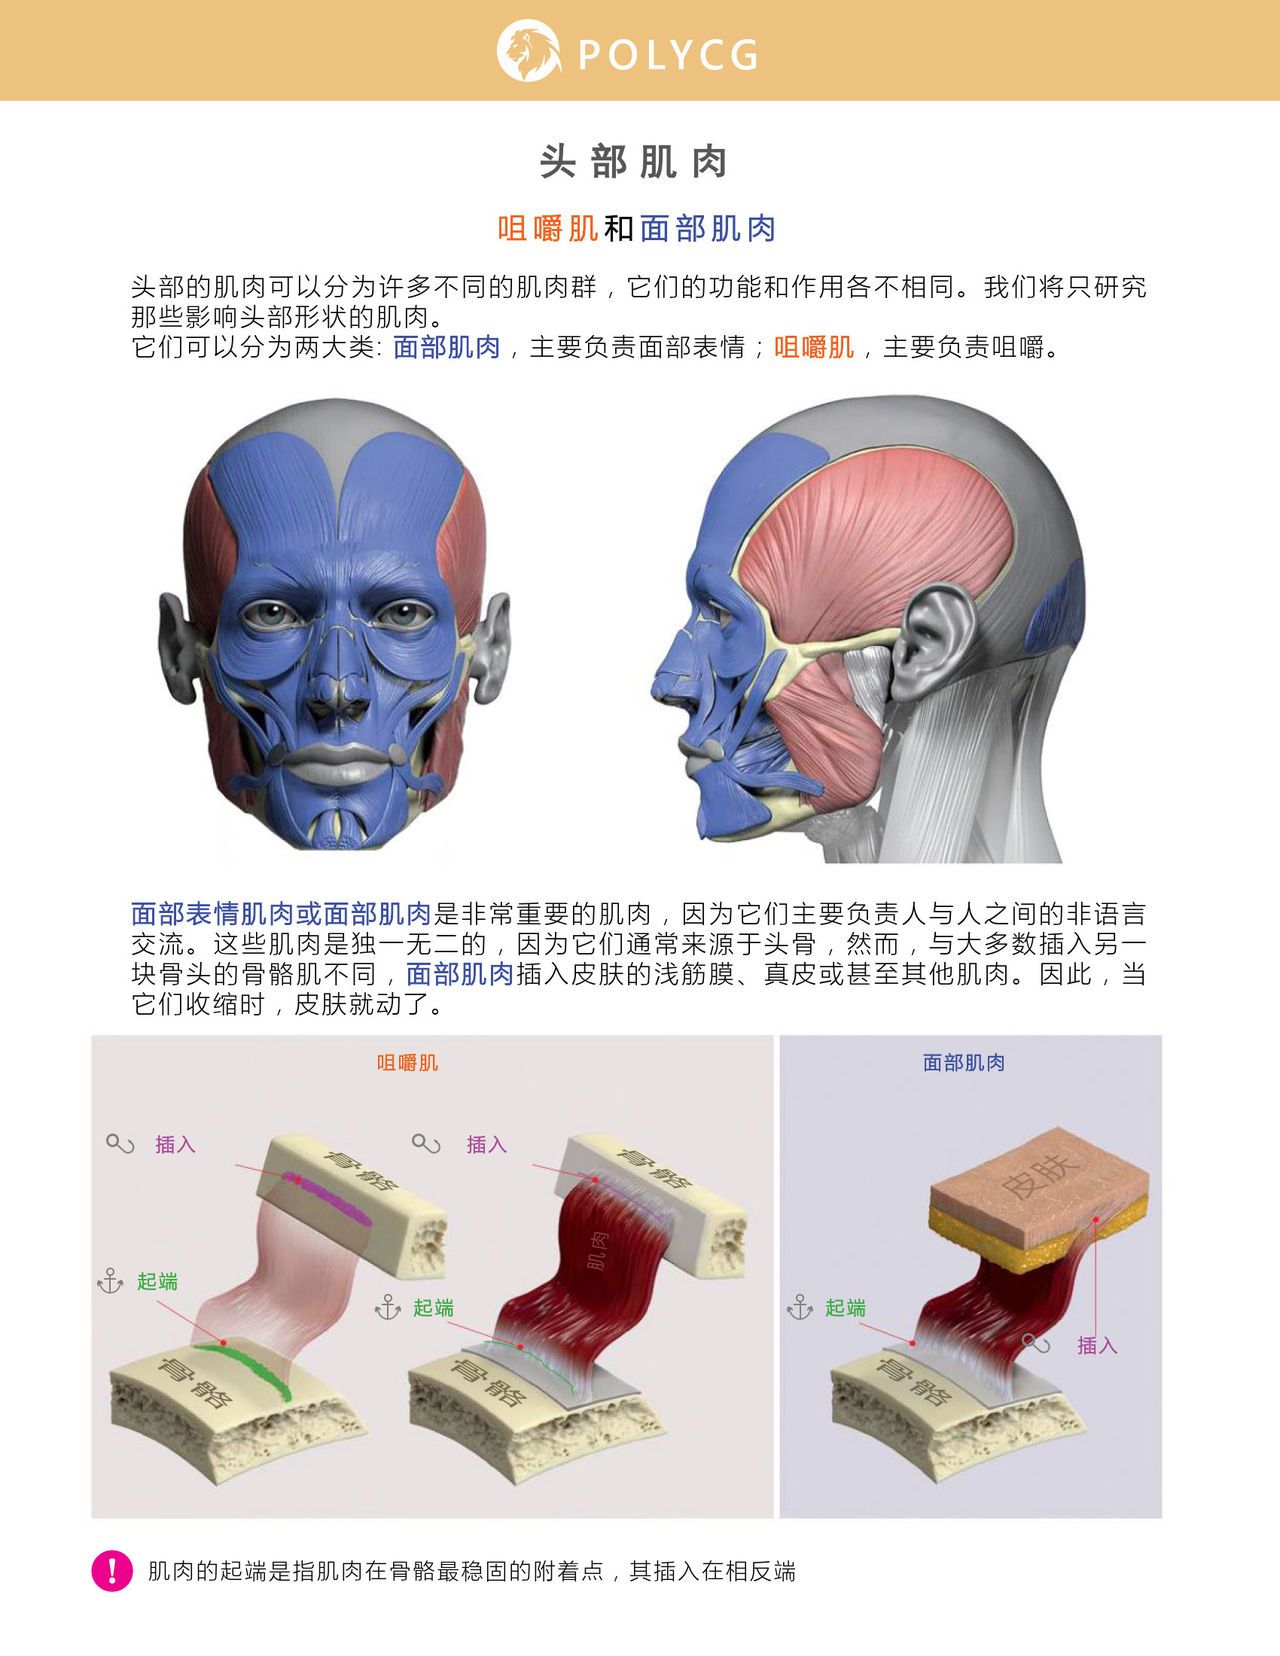 Uldis Zarins-Anatomy of Facial Expression-Exonicus [Chinese] 面部表情艺用解剖 [中文版] 50